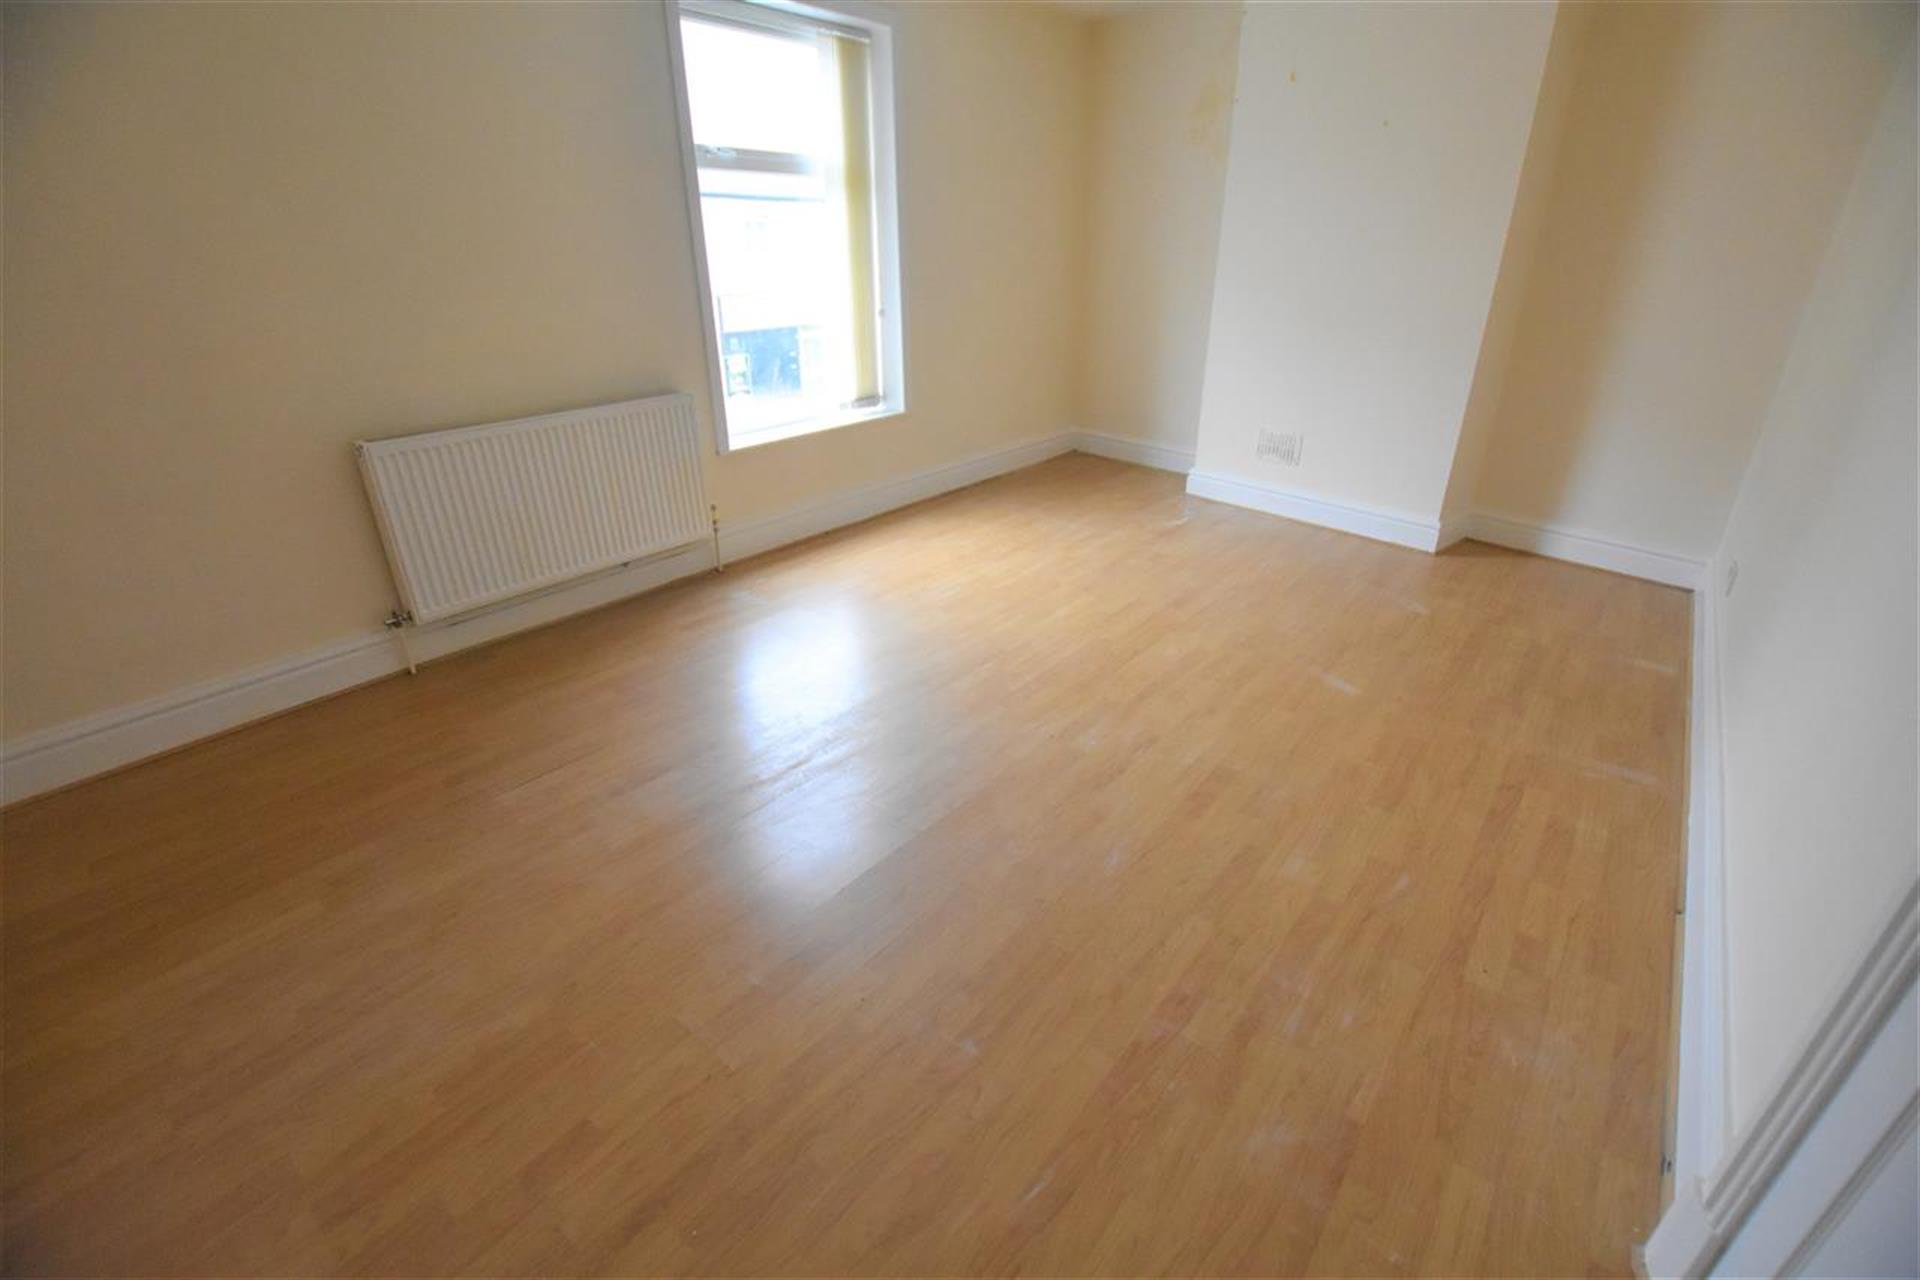 3 Bedroom End Terraced House To Rent - Master Bedroom